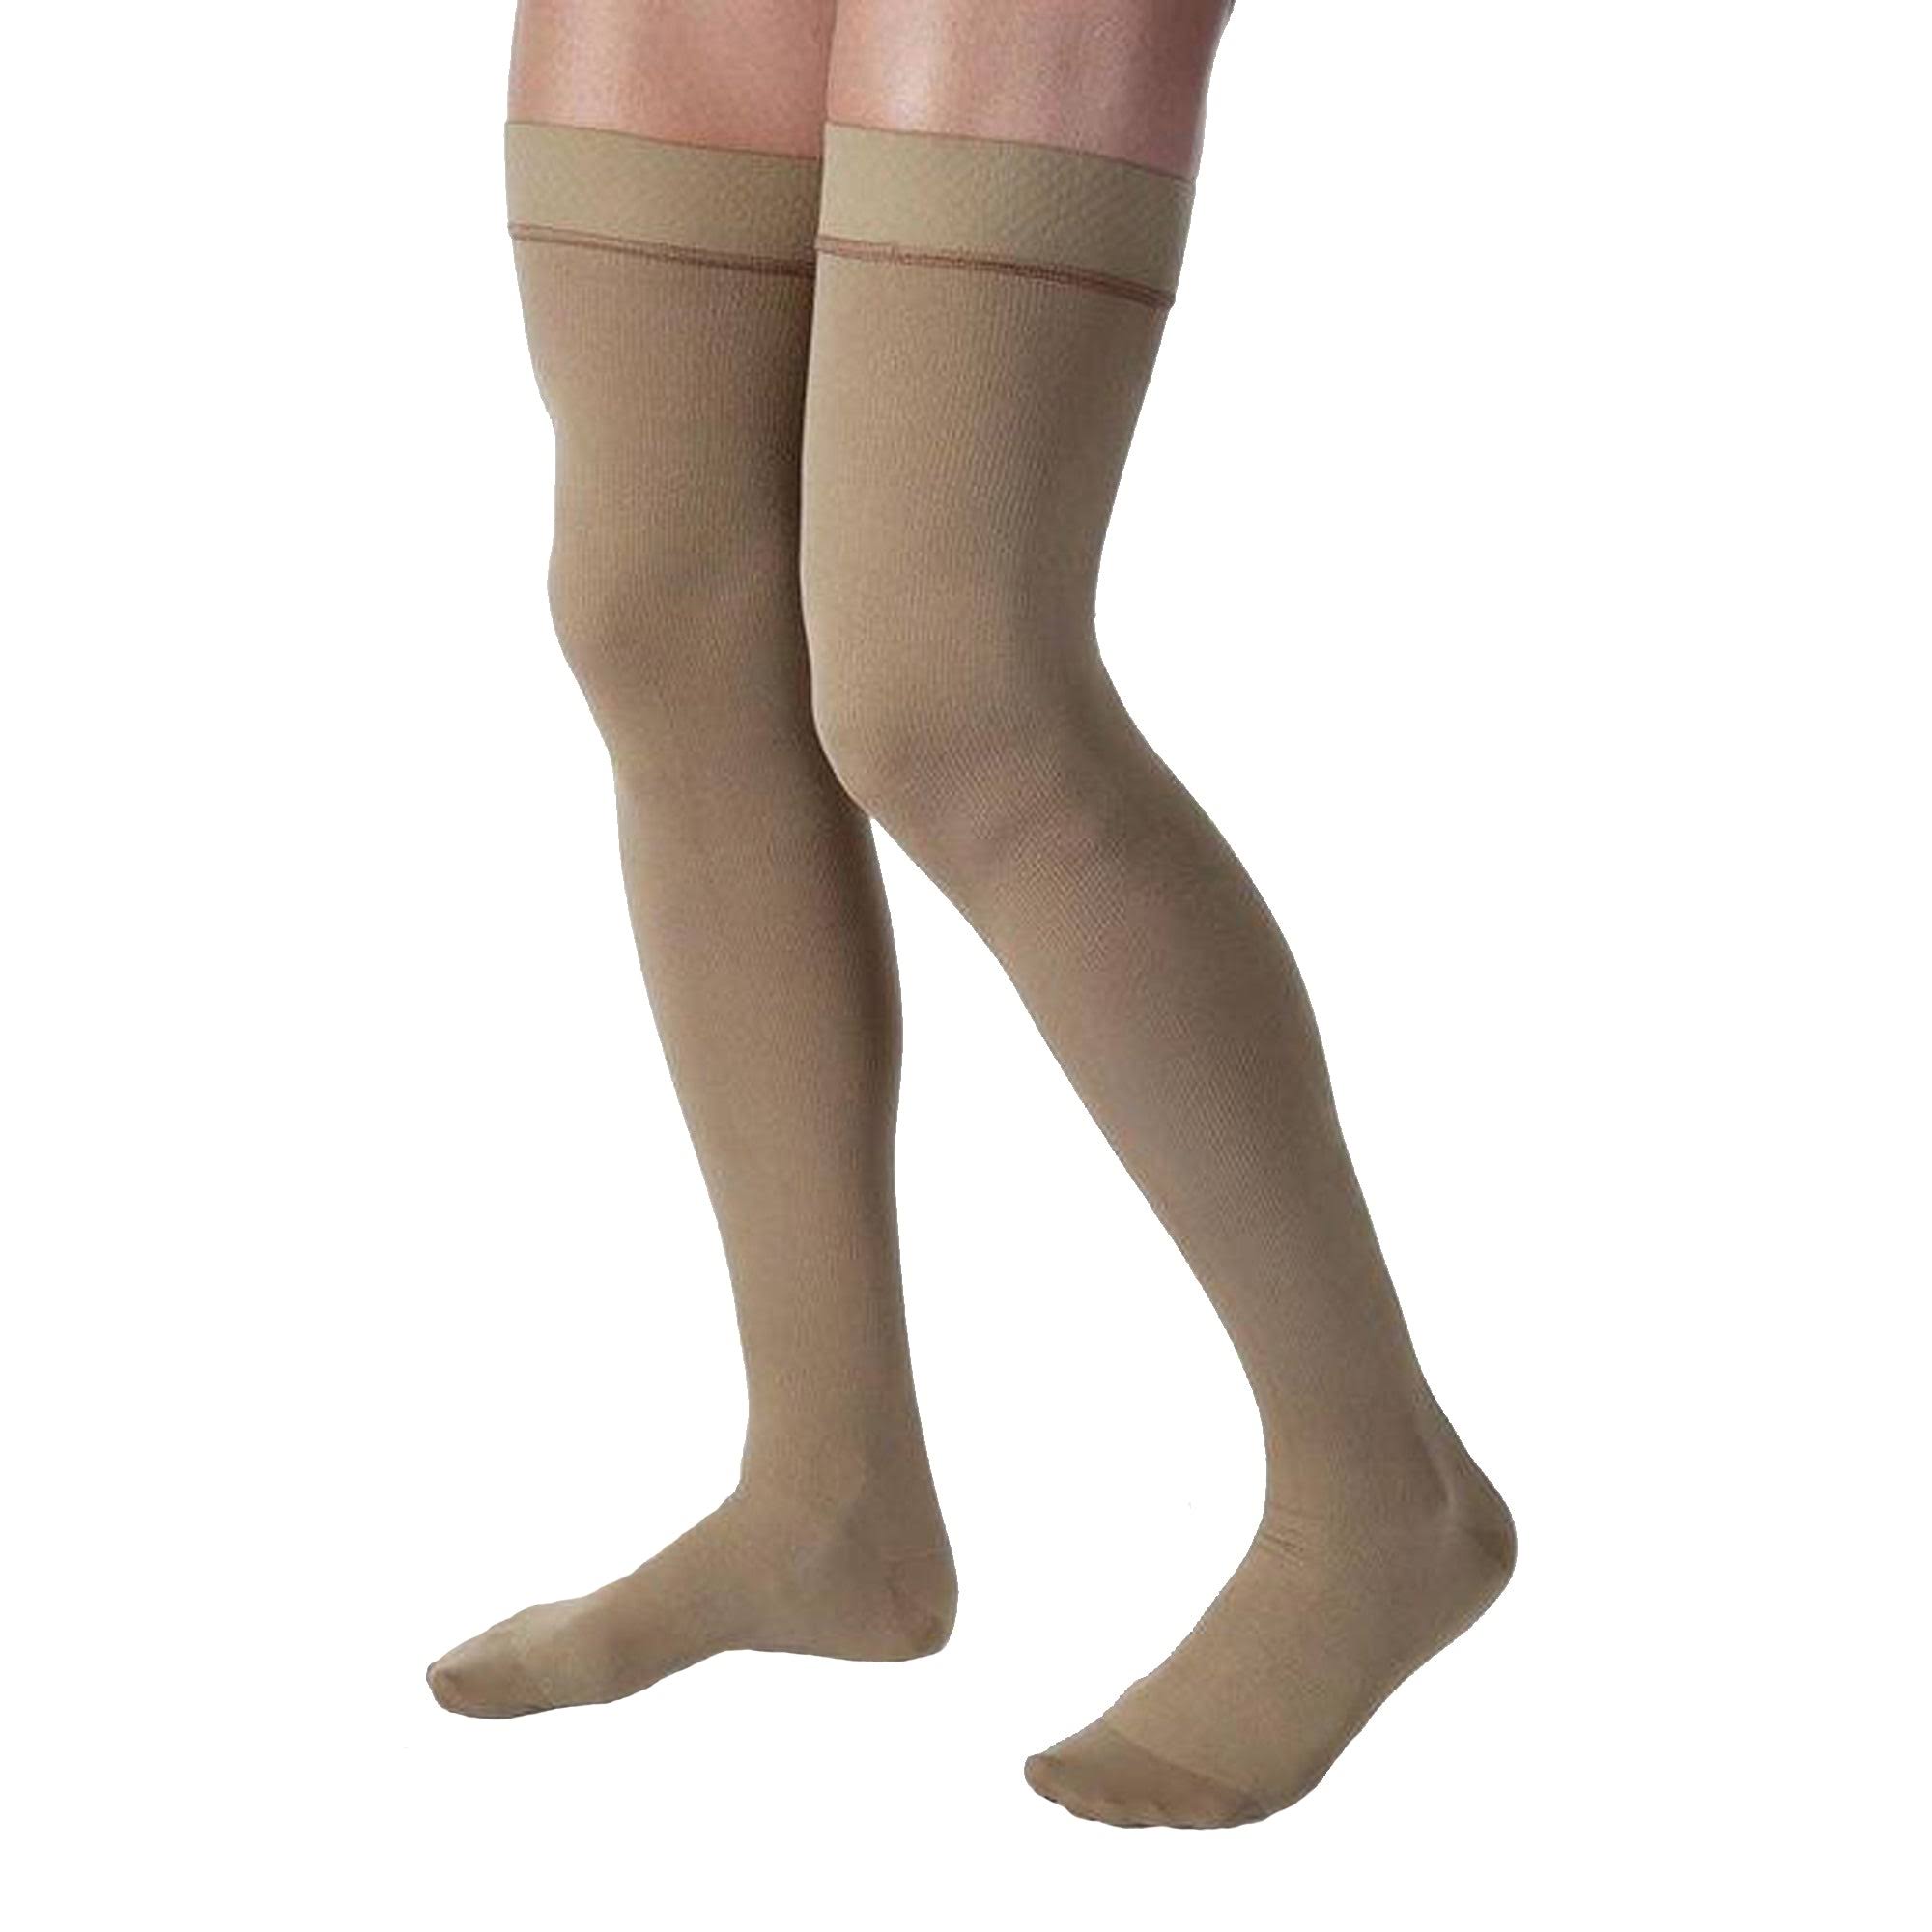 Jobst Men's Compression Closed Toe Thigh High Support Sock - Large, Khaki, 20-30mmHg